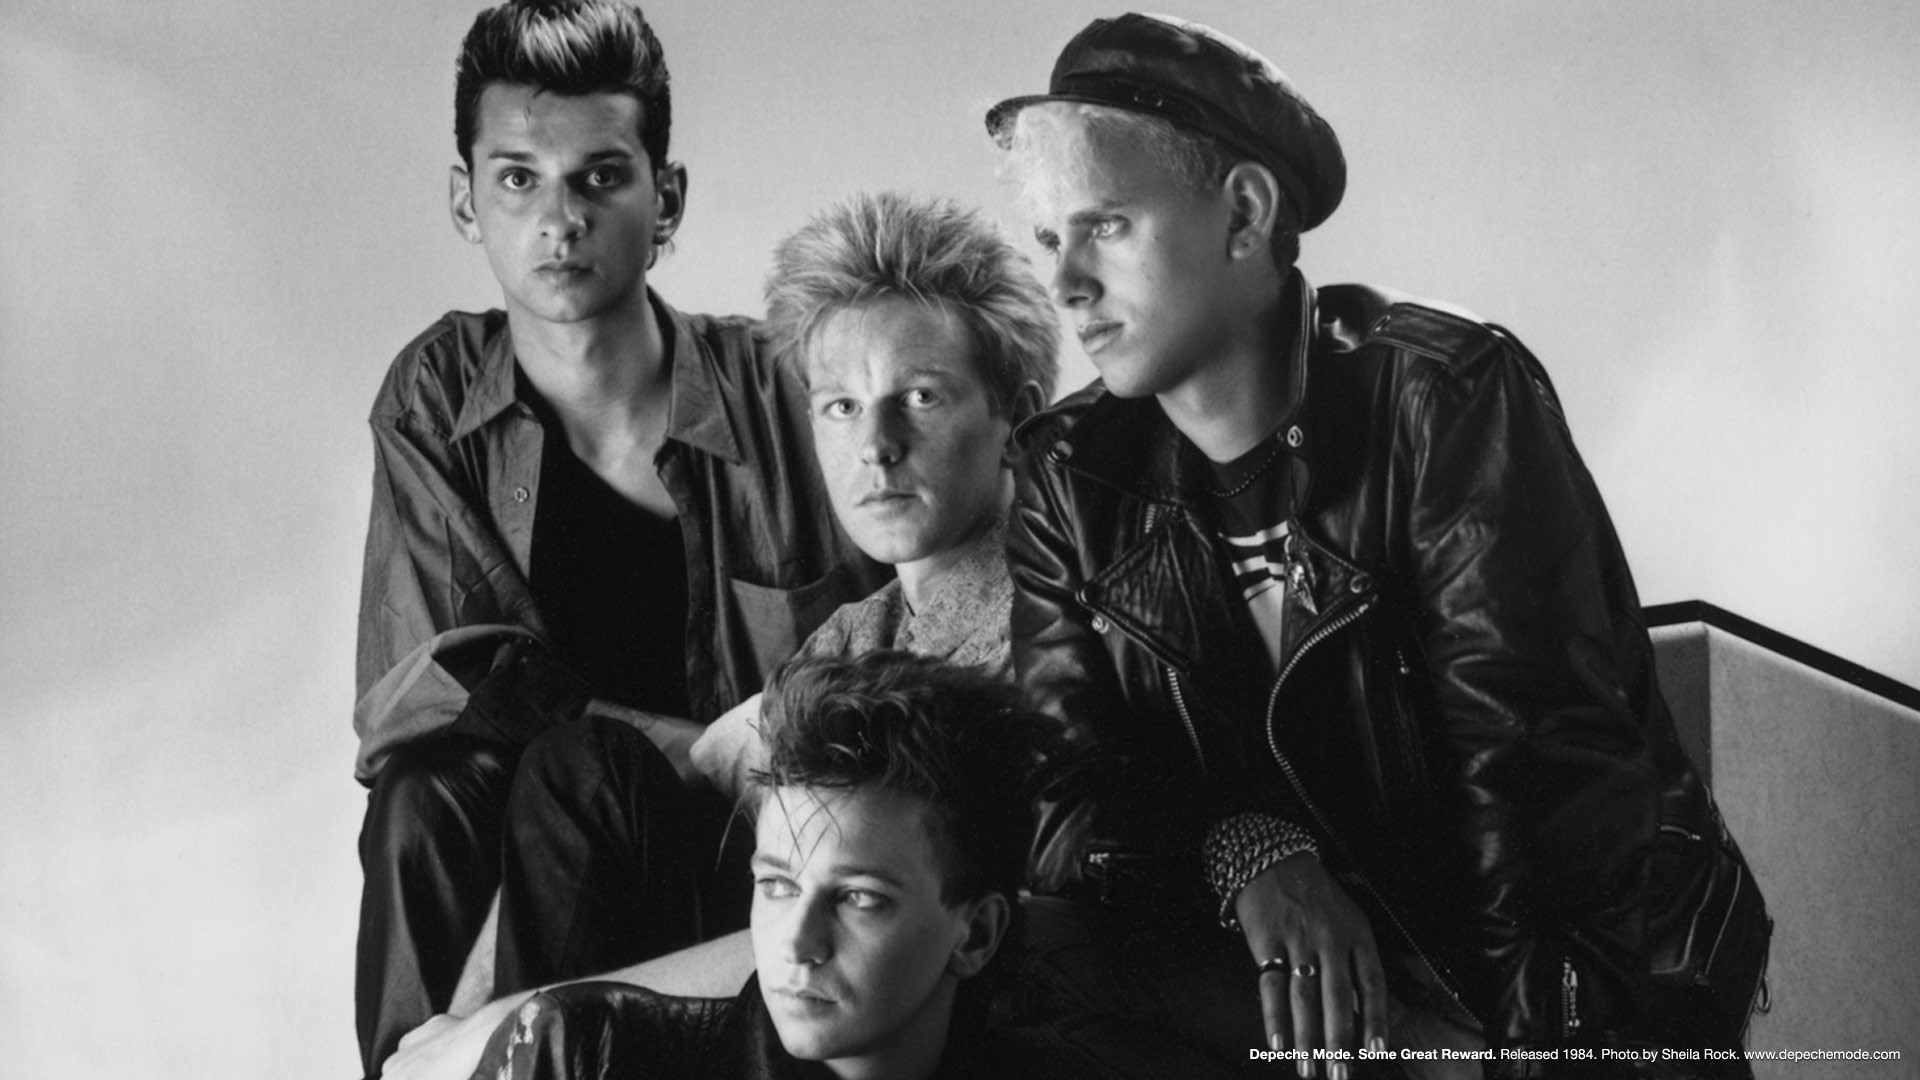 1920x1080 Depeche Mode photo from the wallpaper collection on the official DM site"  http:/